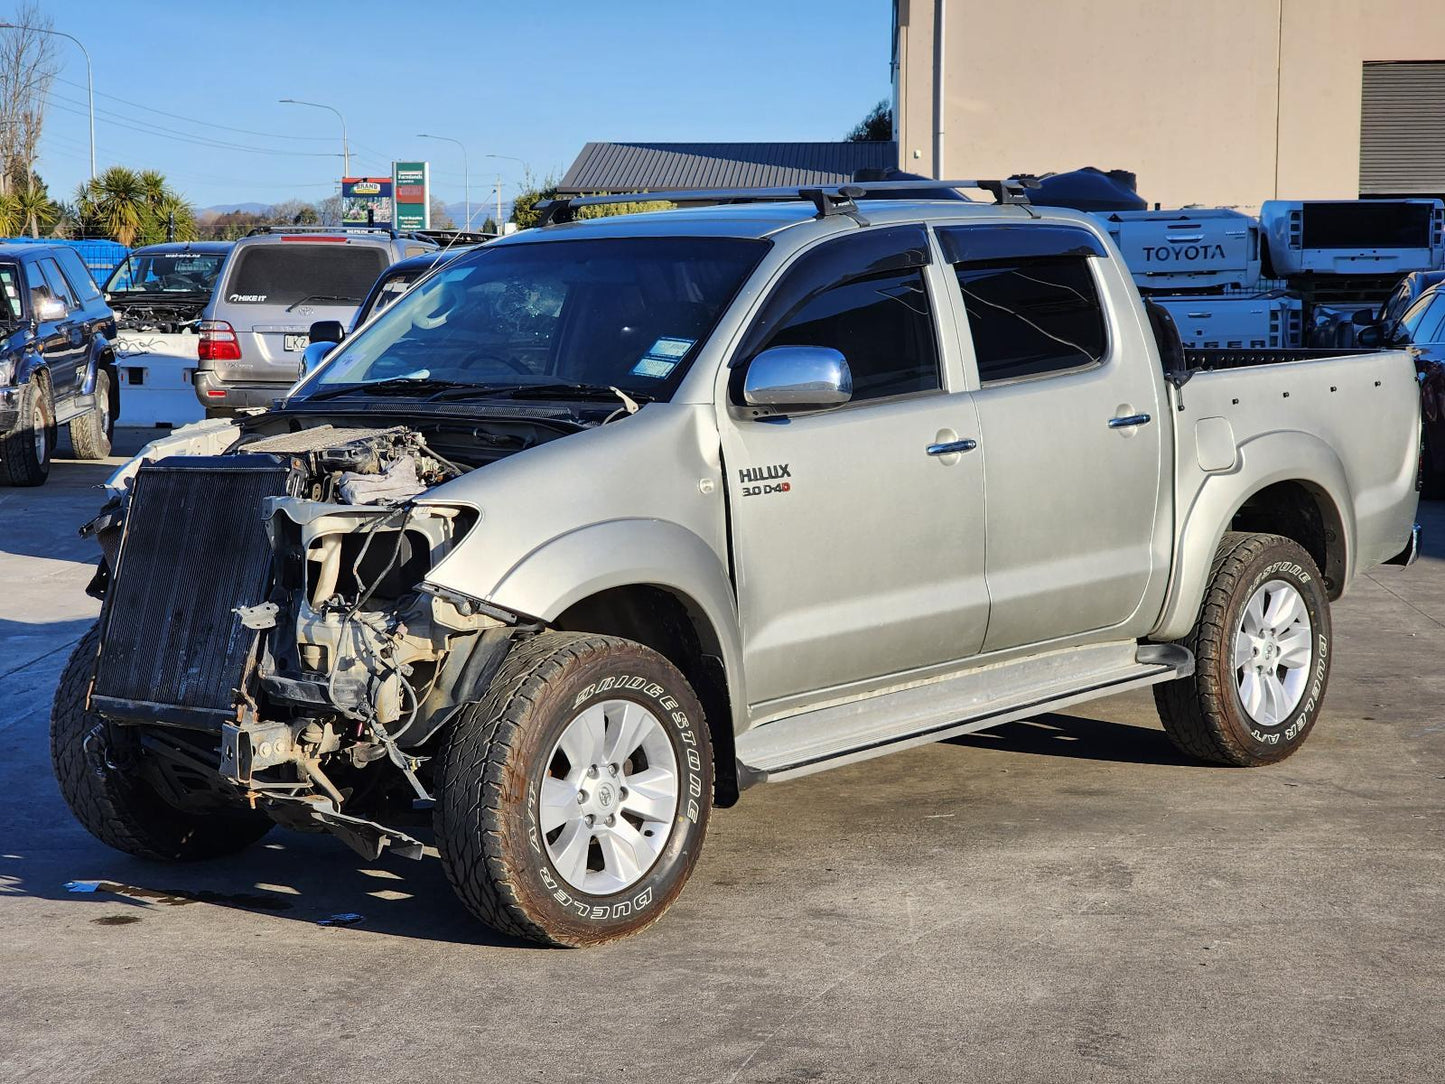 Now Wrecking: 2005 Toyota Hilux KUN26 - A526C